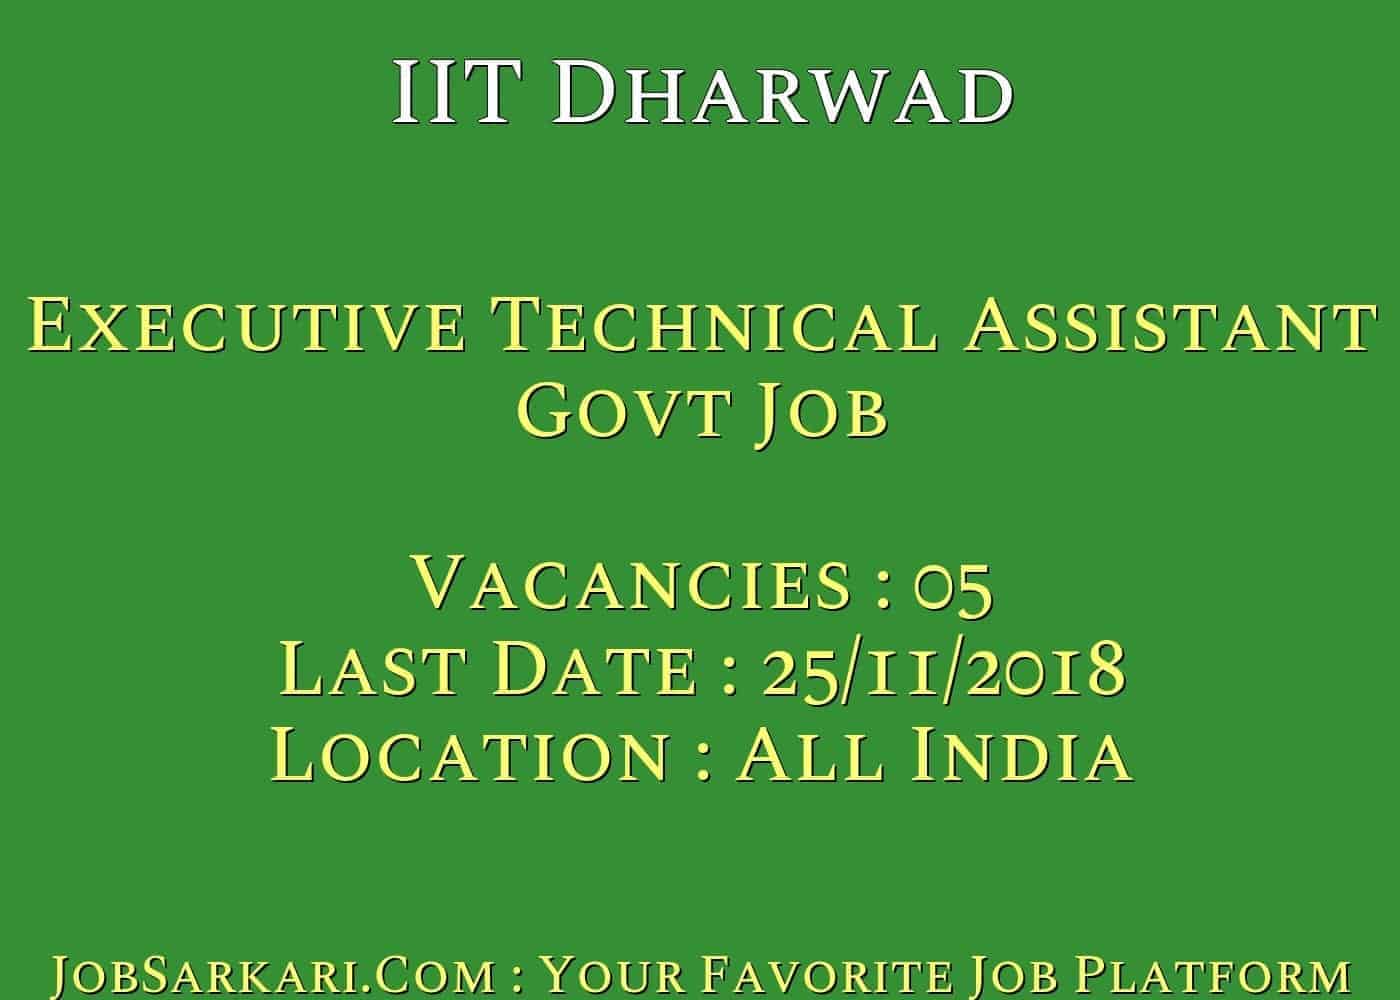 IIT Dharwad Recruitment 2018 for Executive Technical Assistant Govt Job